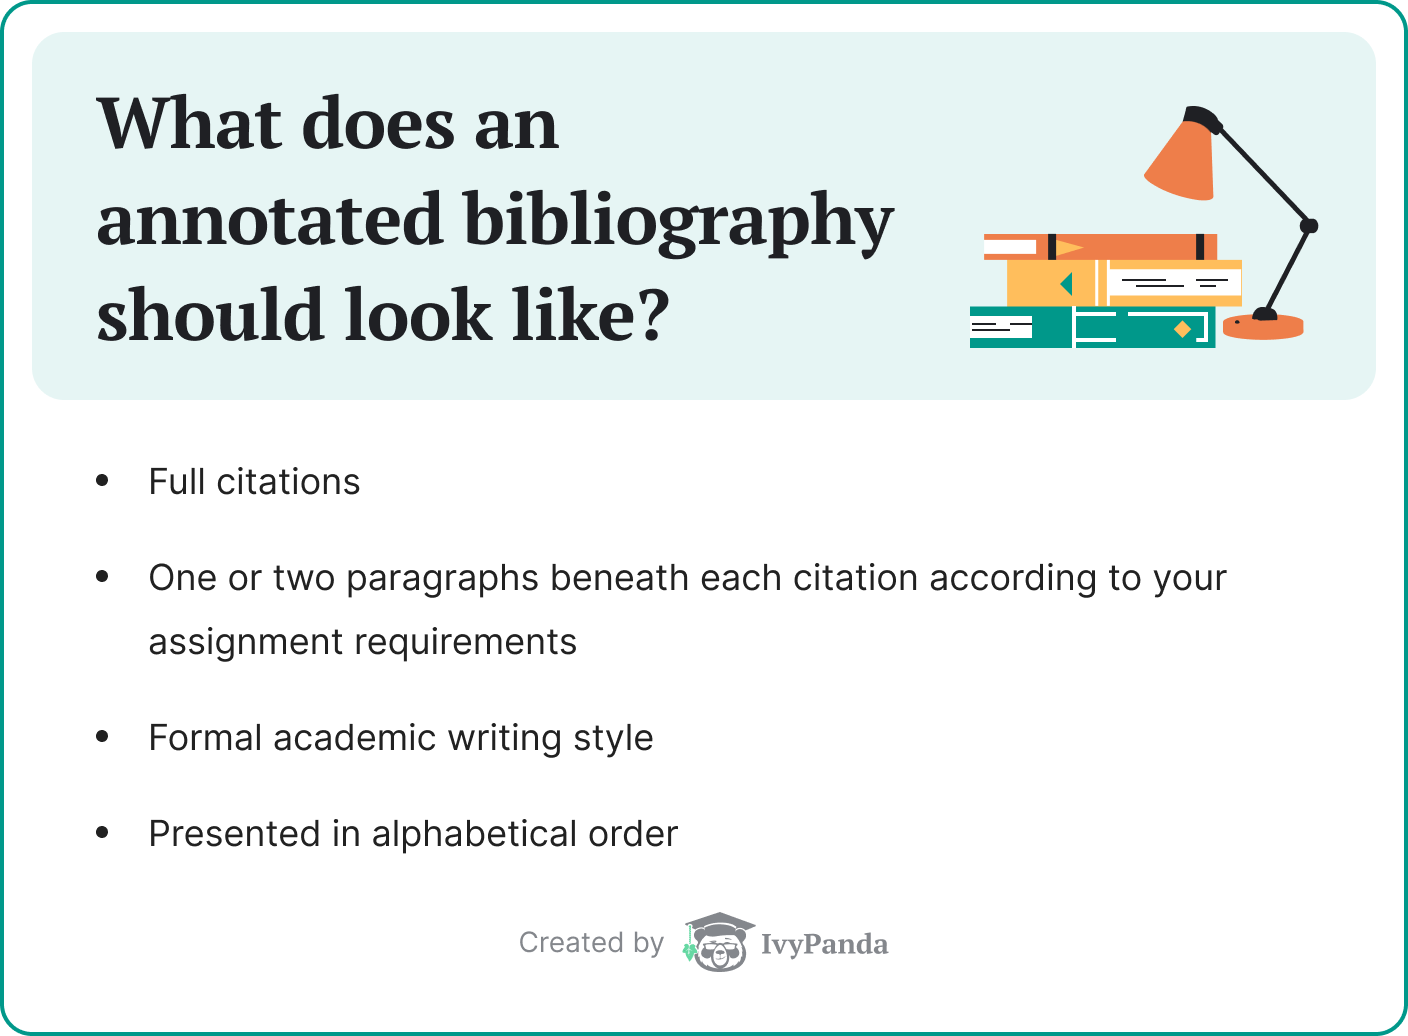 What Does Annotated Bibliography Should Look Like?